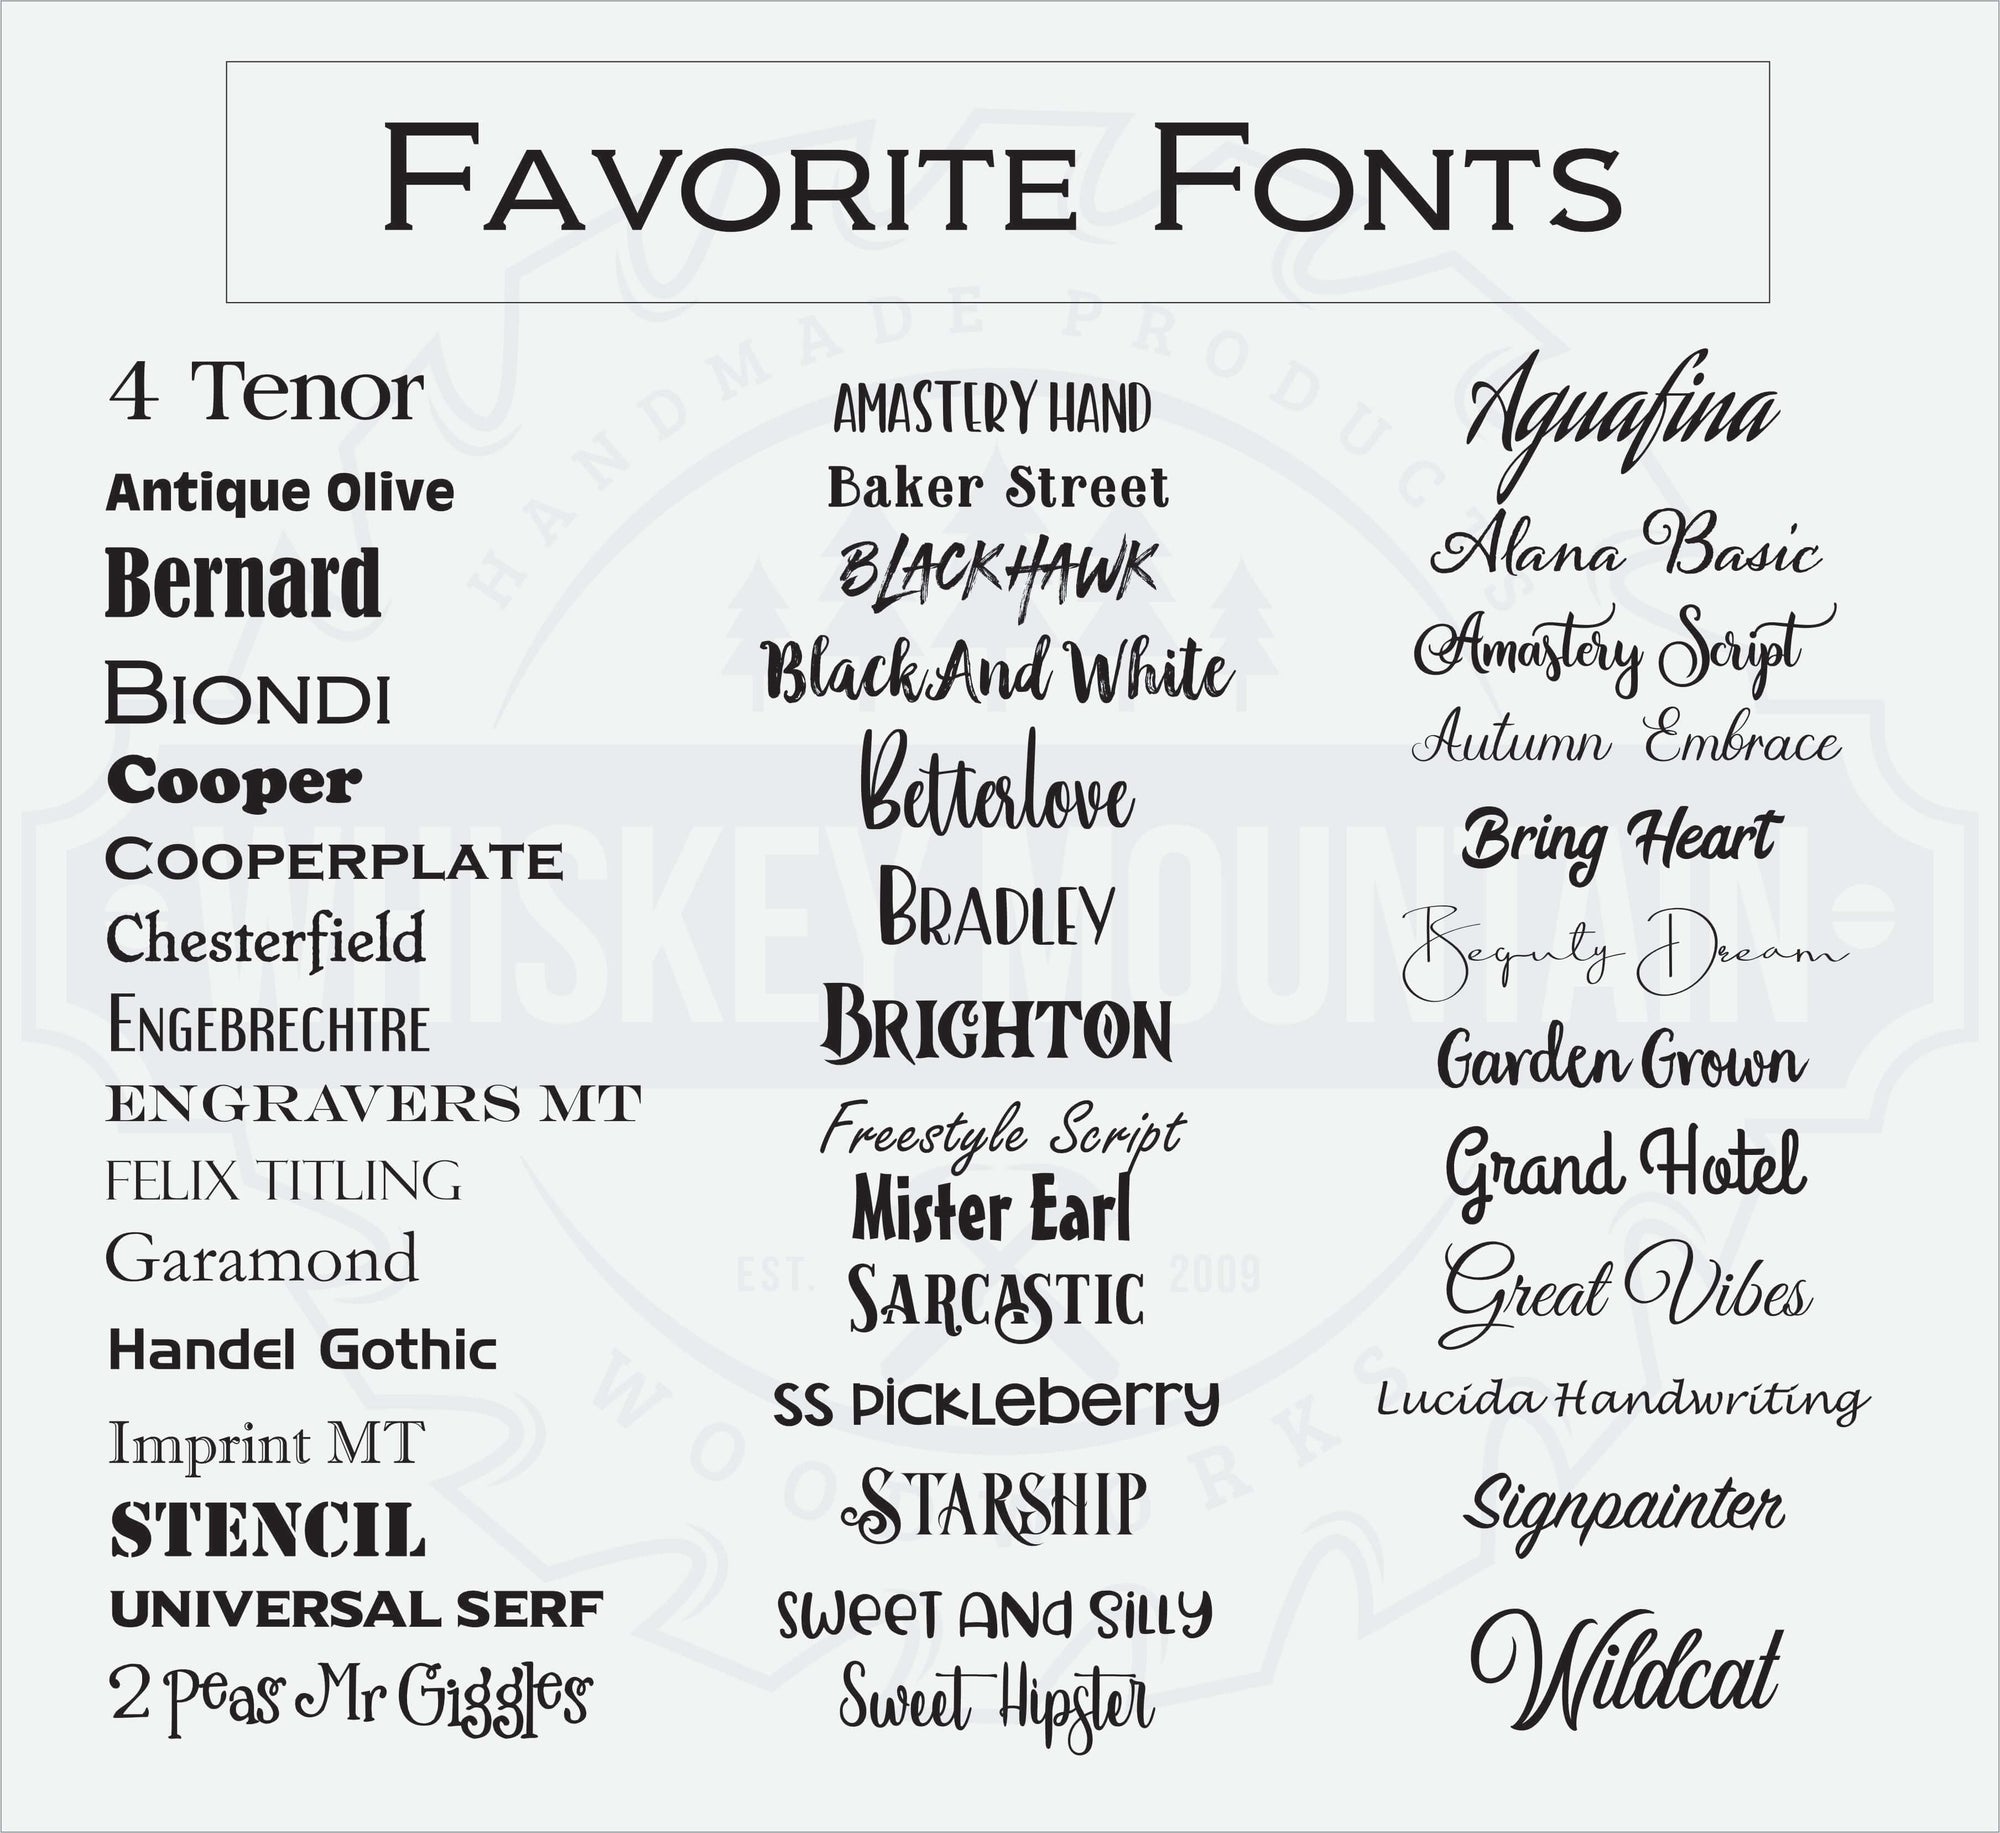 Image showing fonts available for personalization